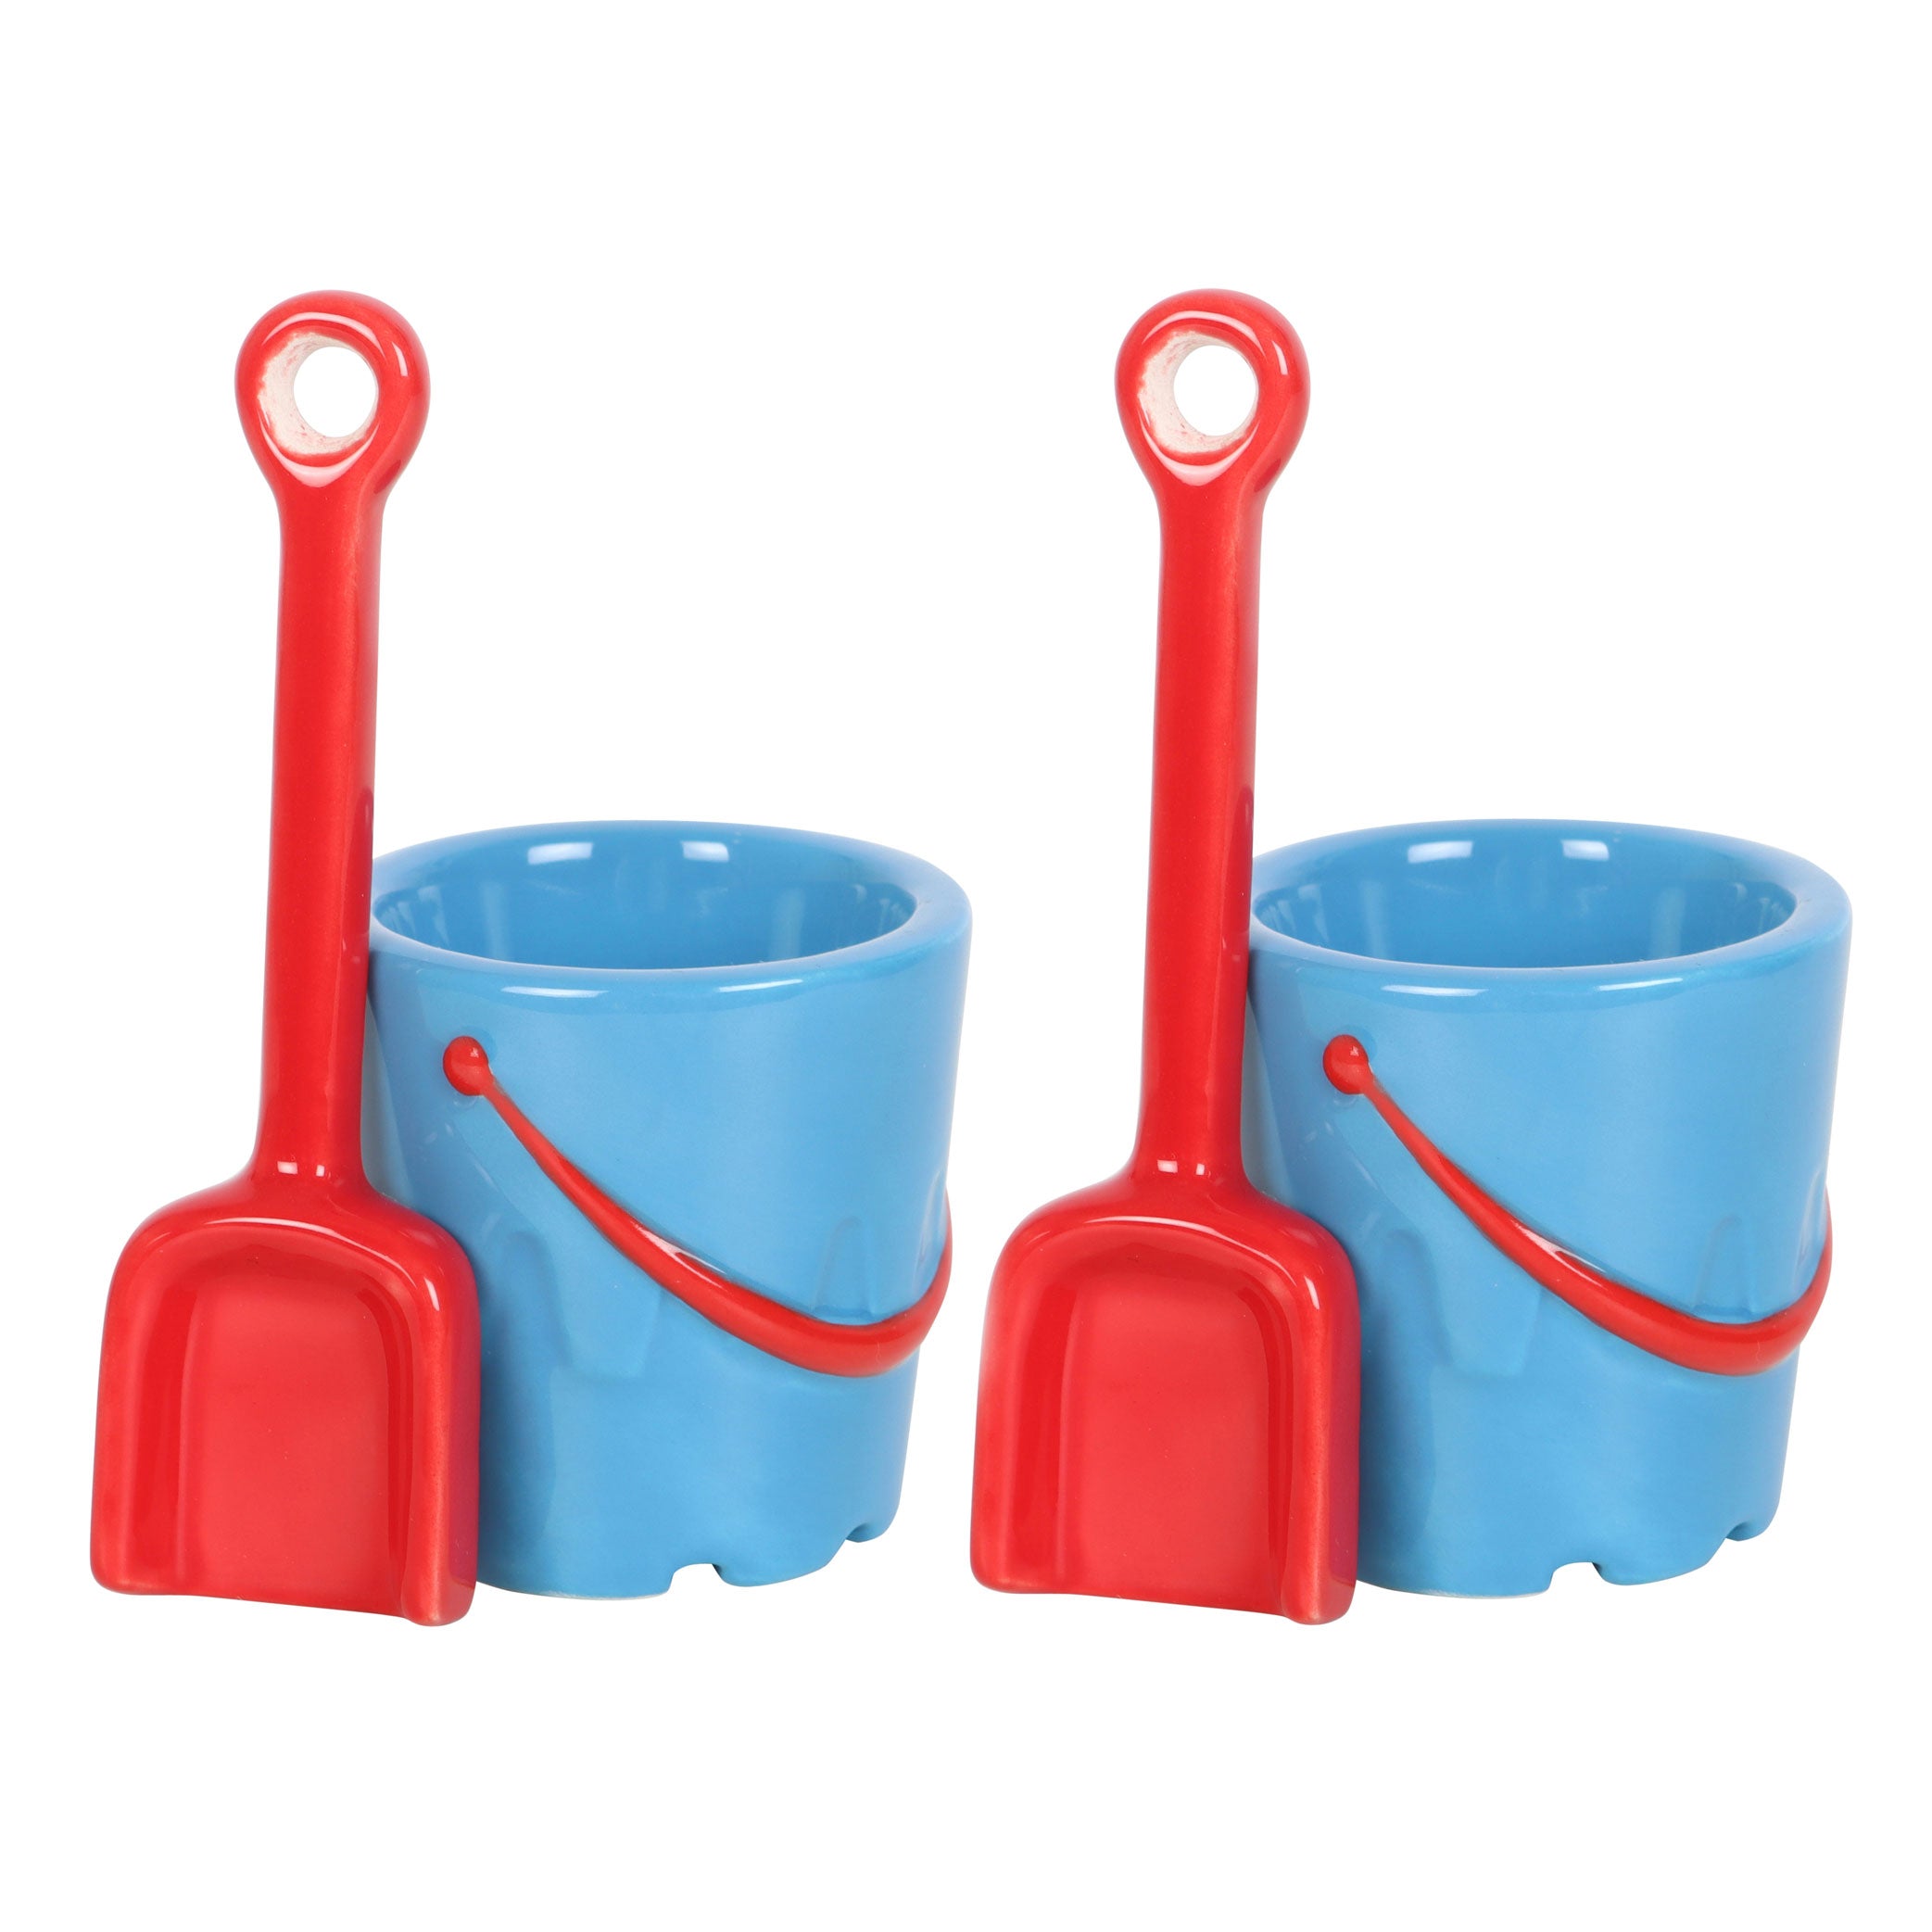 View Set of 2 Bucket Shaped Ceramic Egg Cups with Spade Spoons information